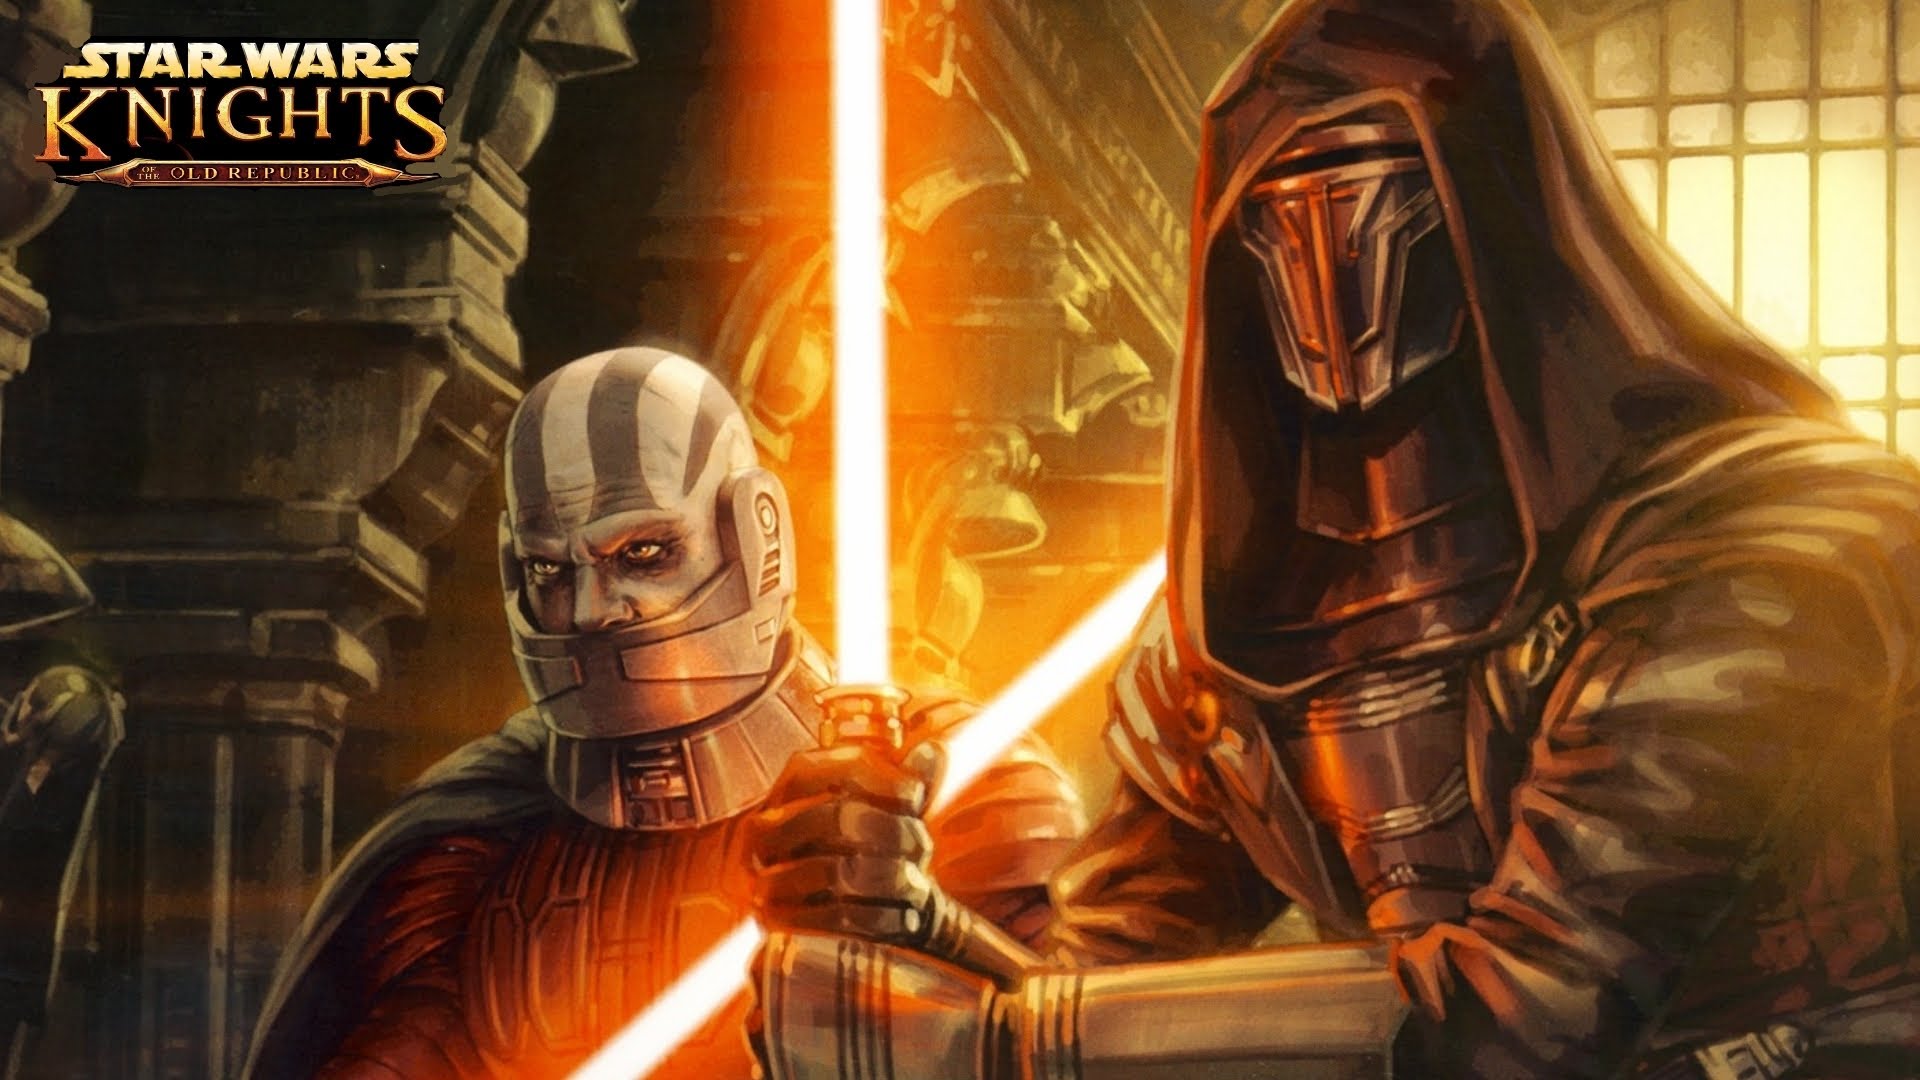 Star Wars: The Old Republic - Metacritic